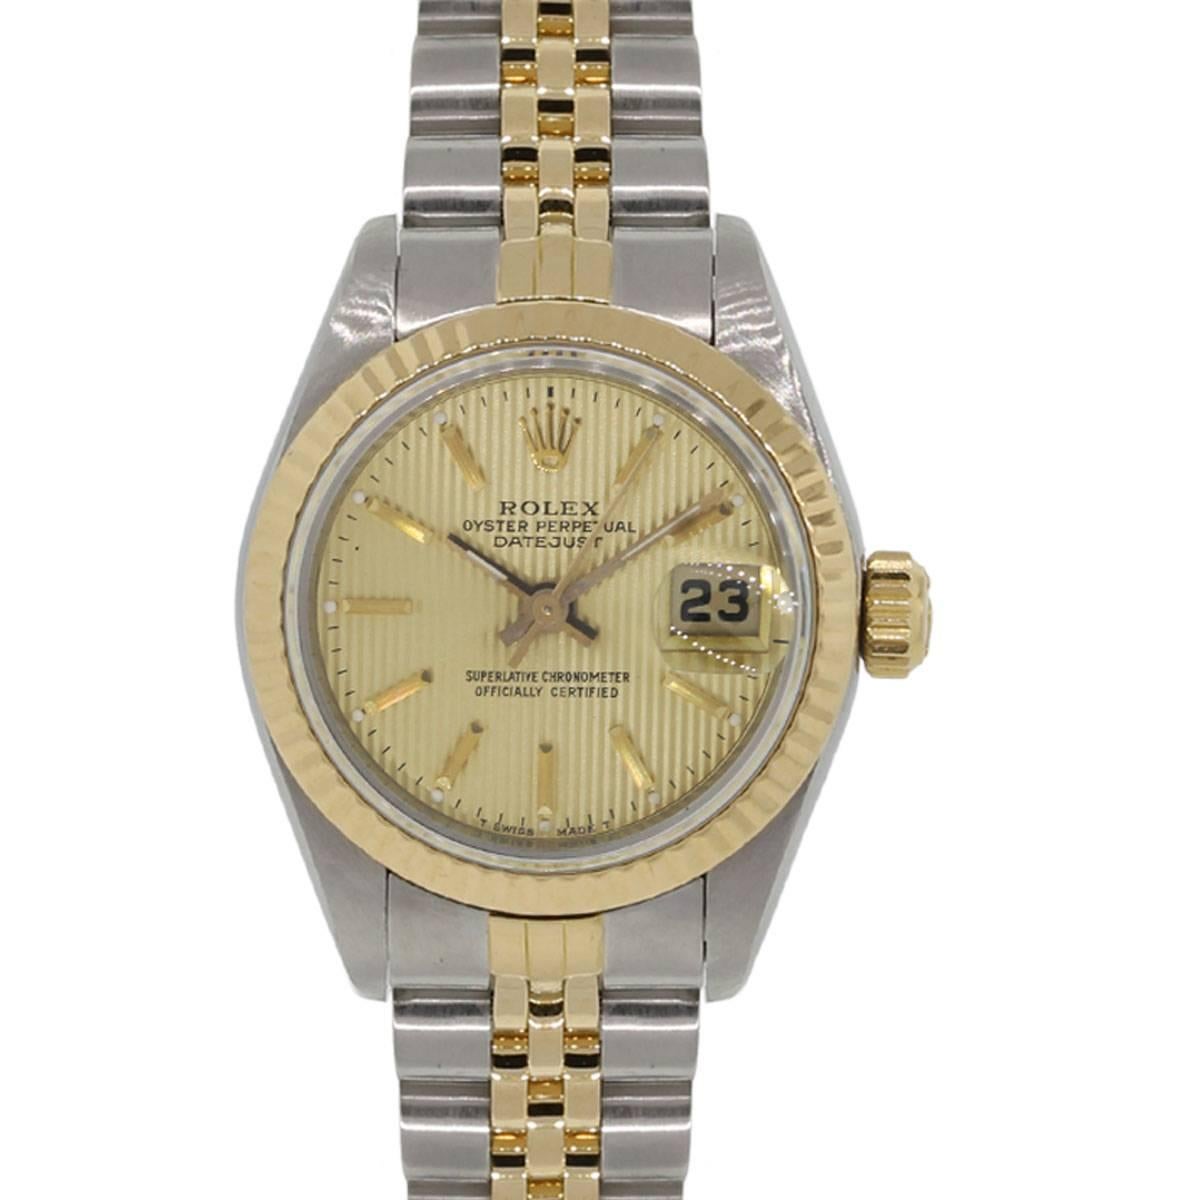 Rolex 69173 Datejust Tapestry Dial Two Tone Wrist Watch